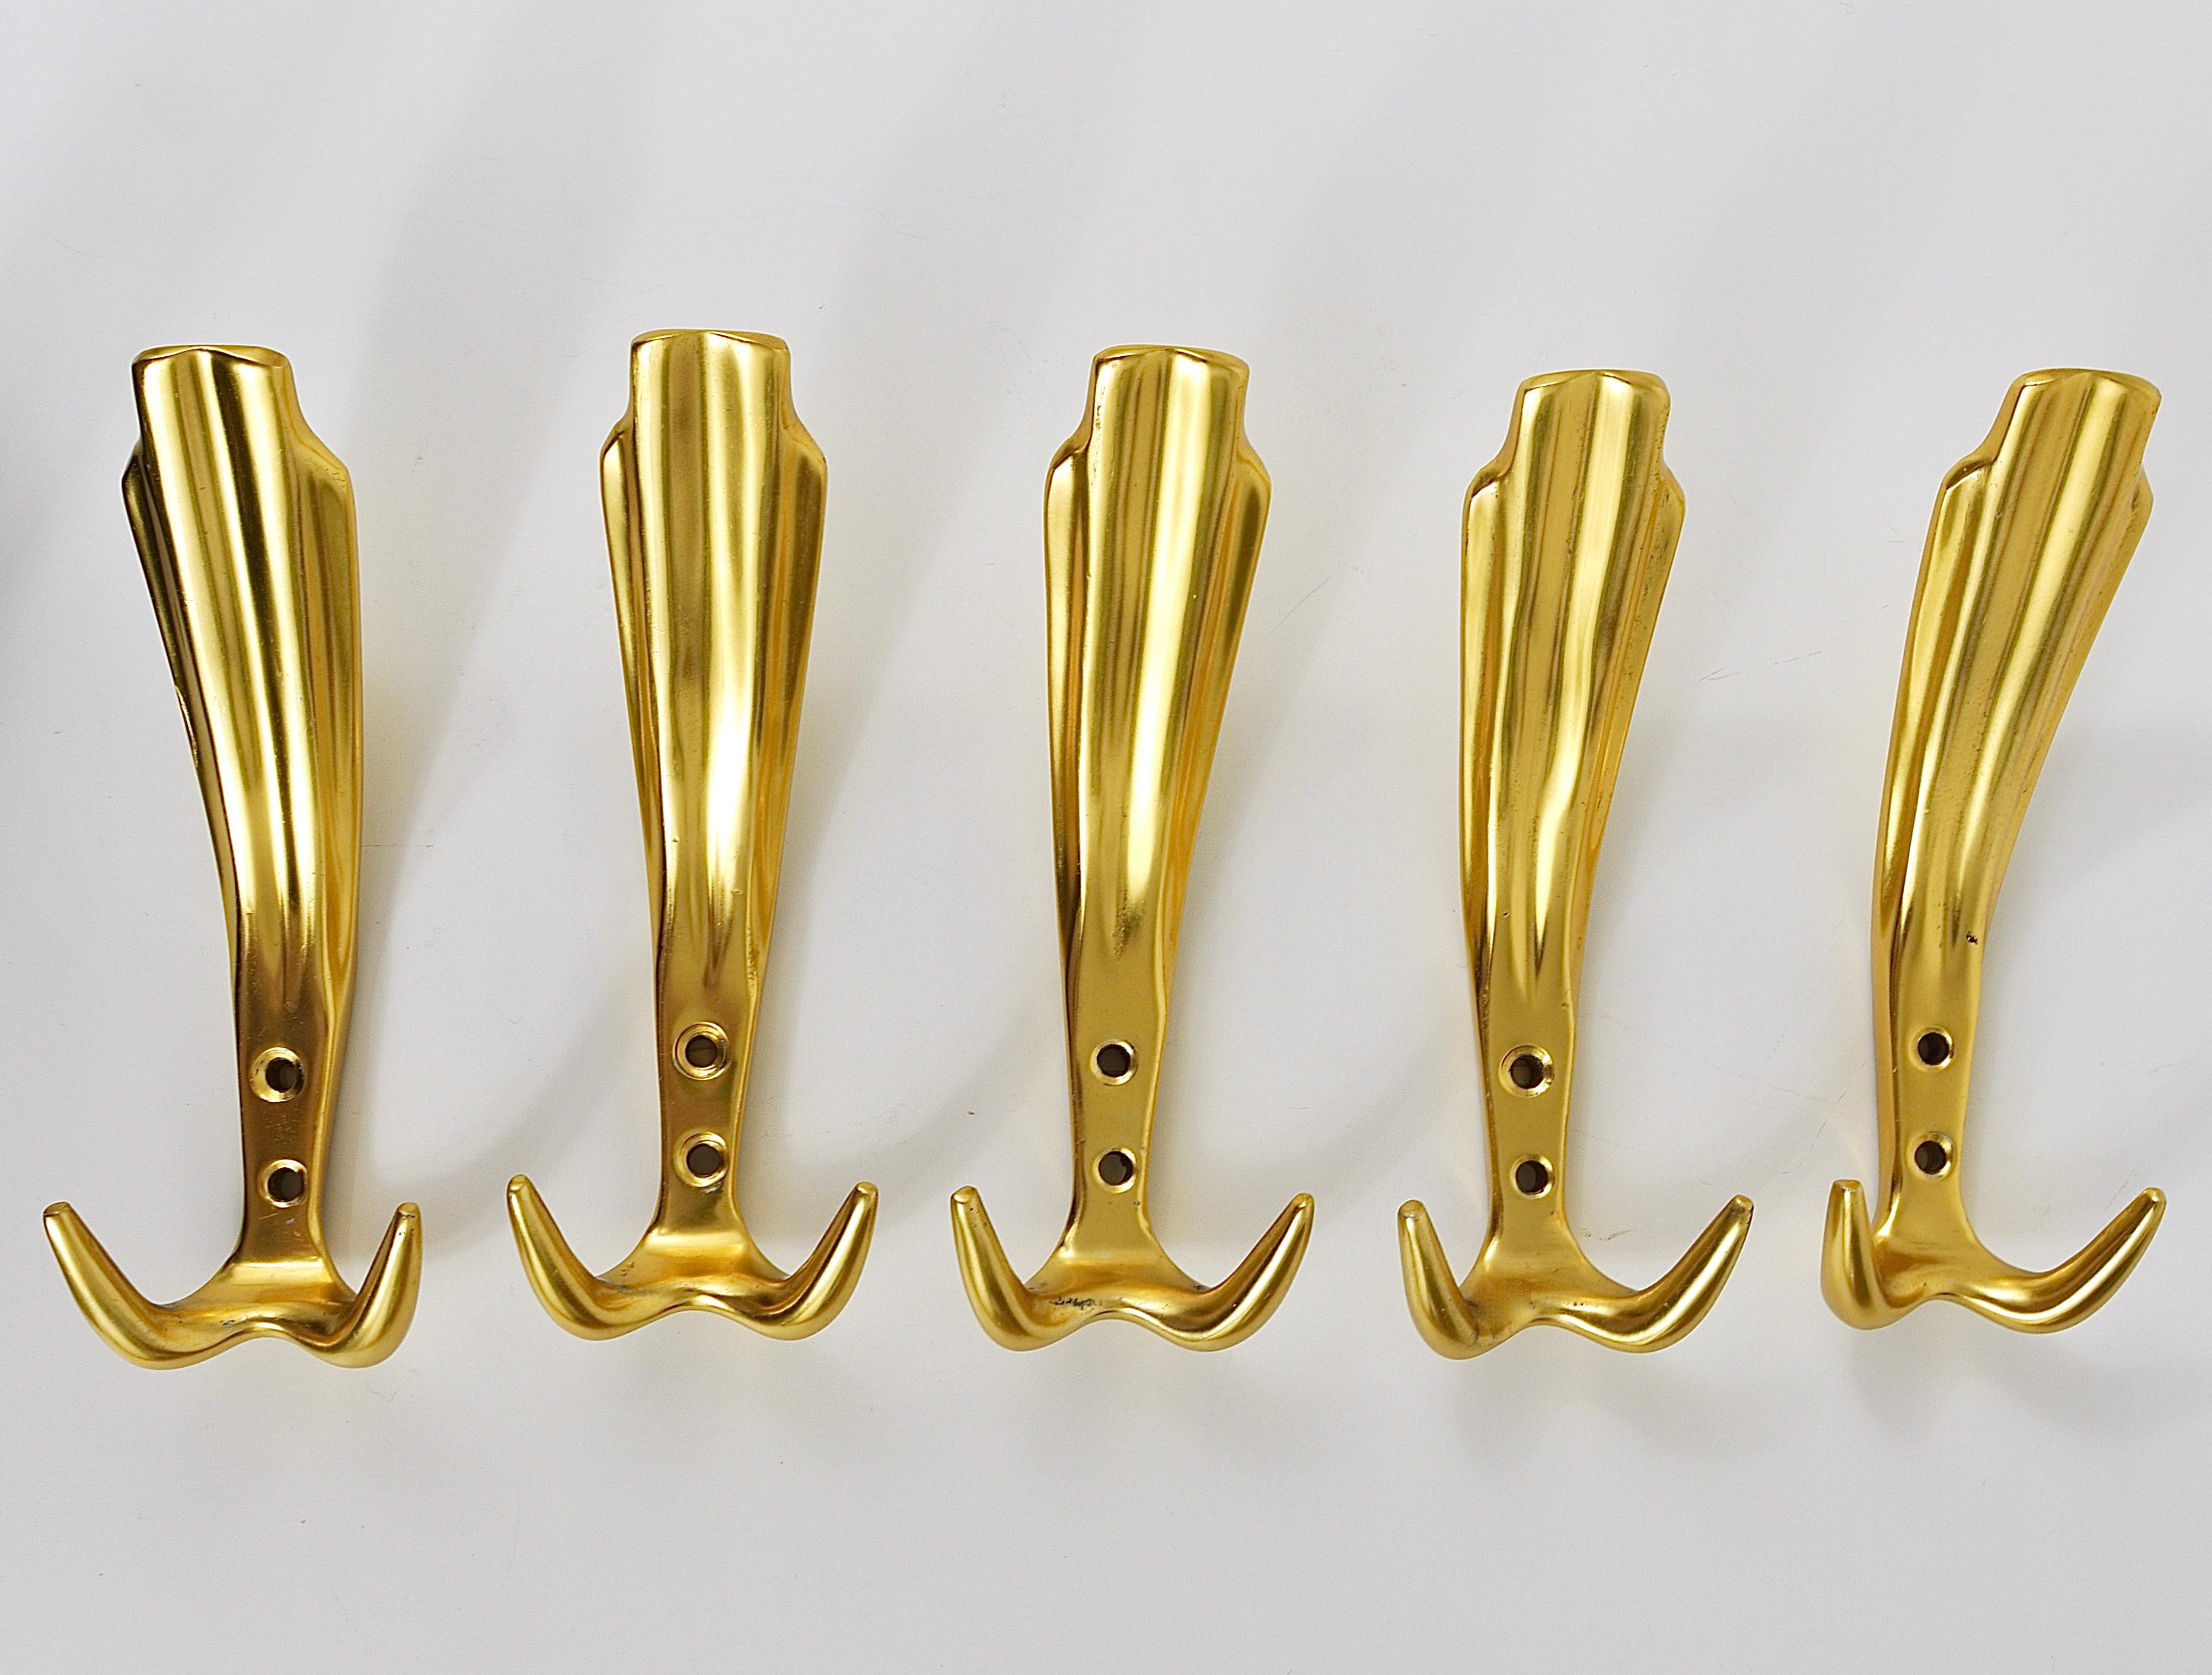 Up to Five Golden Hollywood Regency Wall Coat Hooks, Italy, 1970s For Sale 5